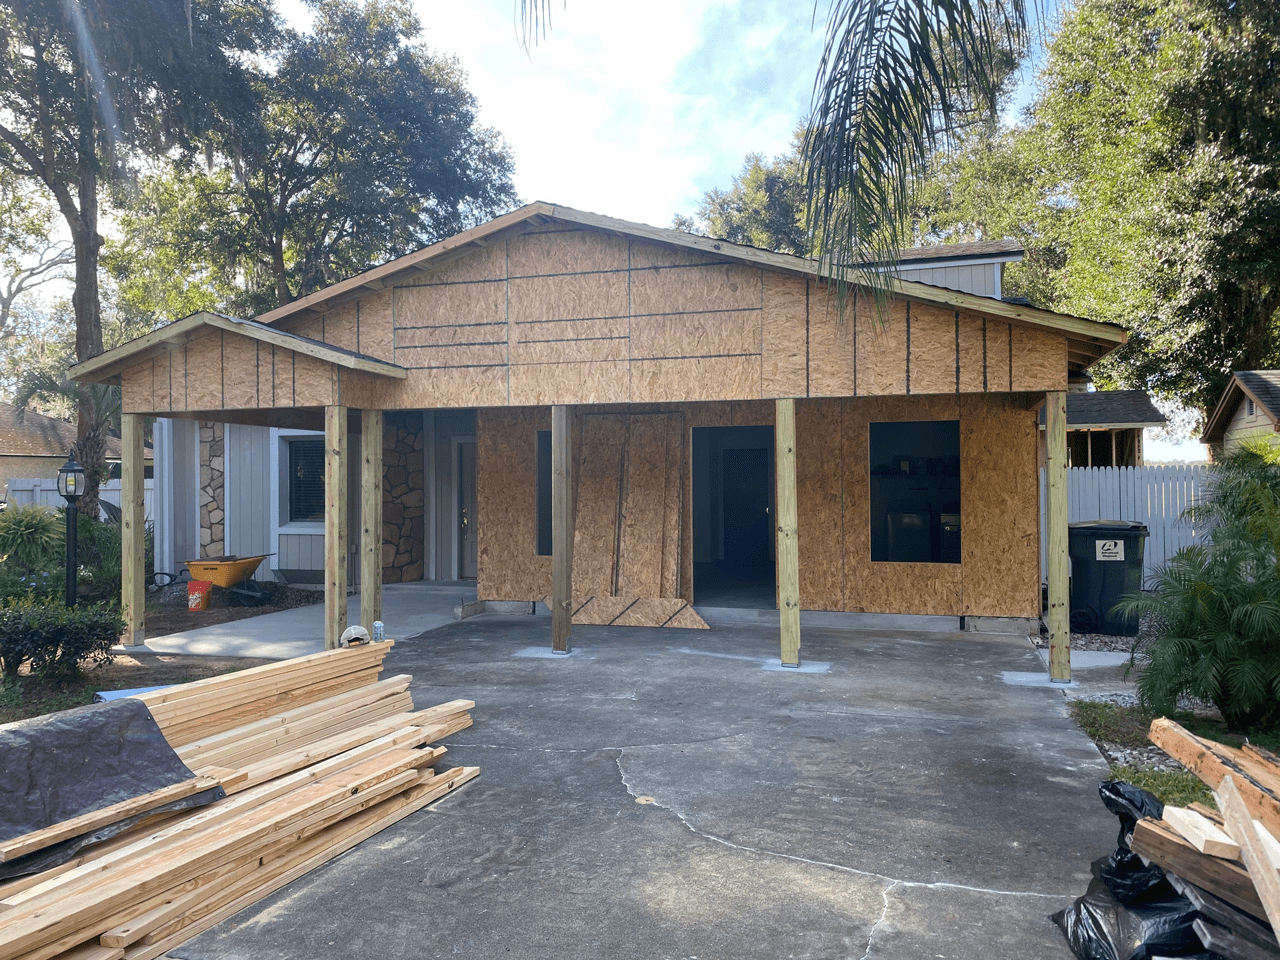 Shown here is a home in the middle of the construction process, featuring a garage conversion into a new room and indoor space.